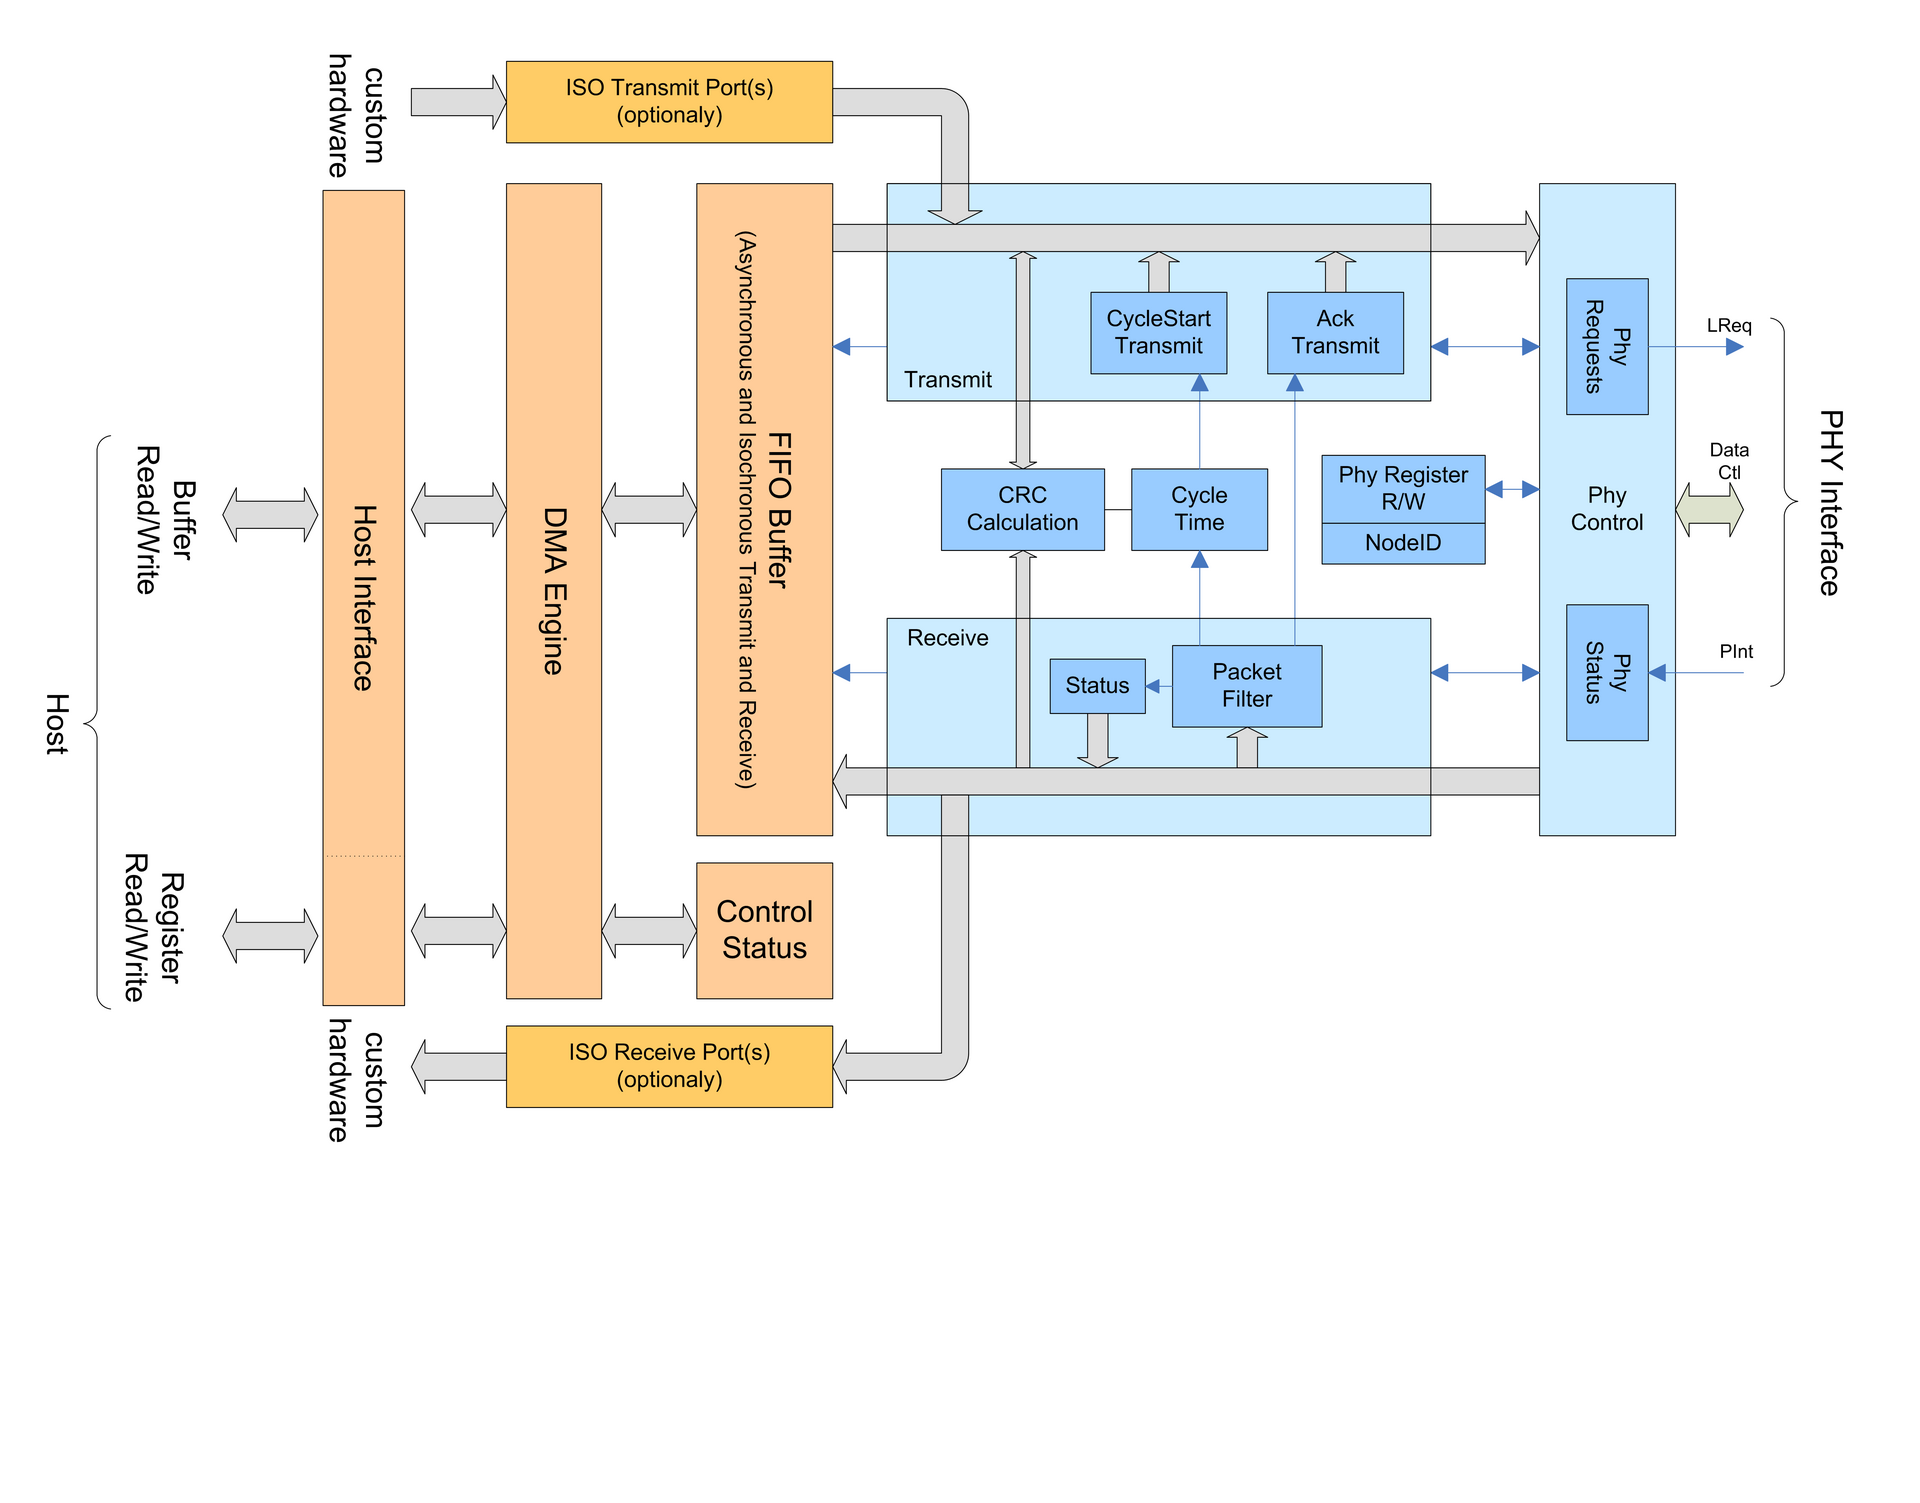 1394 IP Core Solutions - FireCore Extended Block Diagram